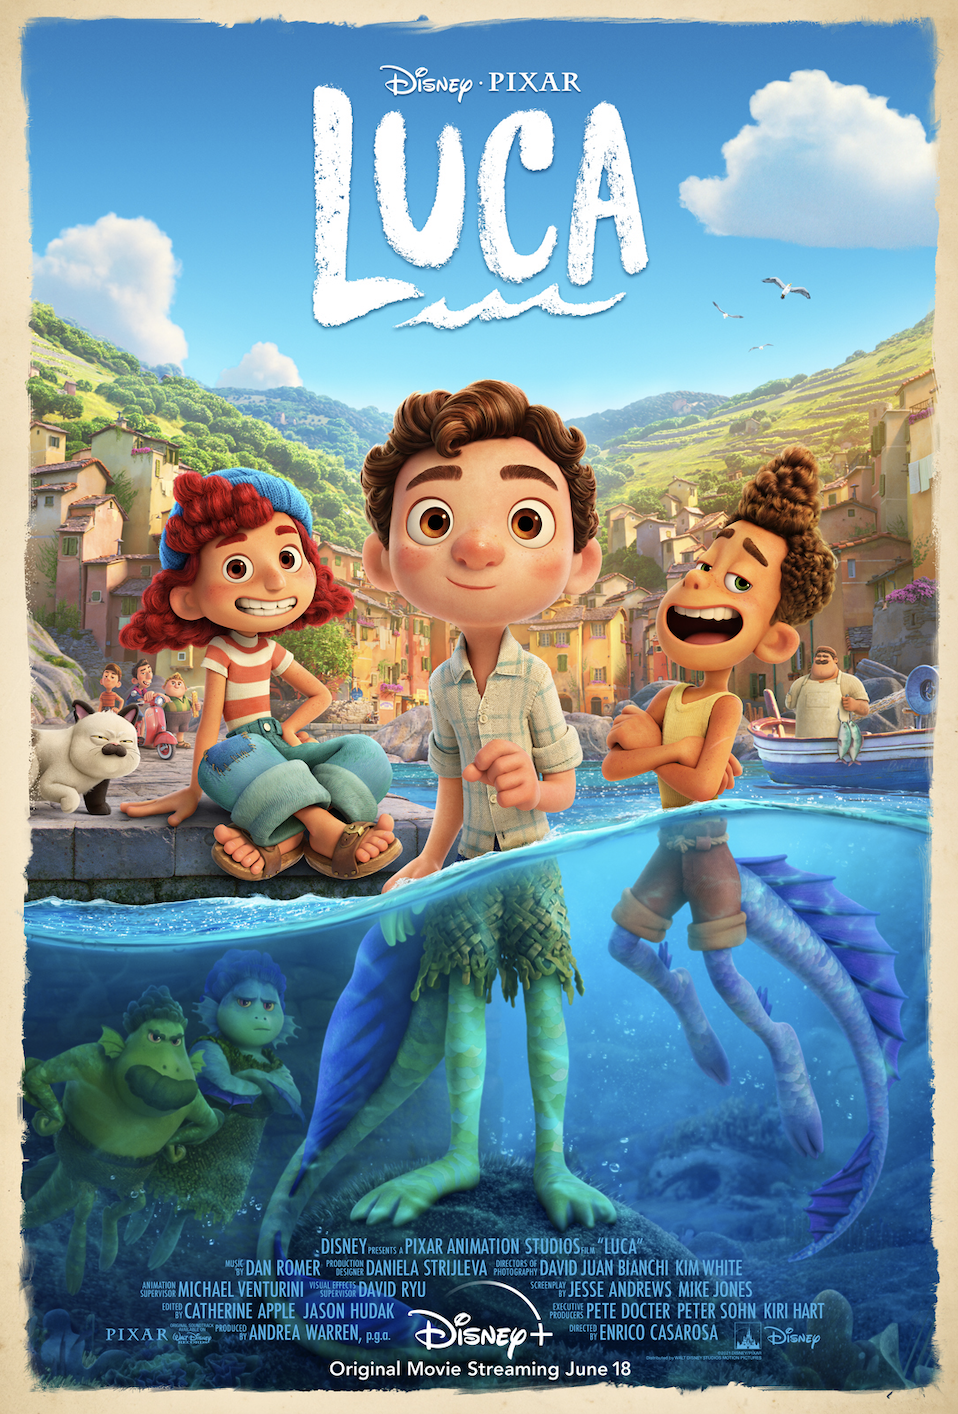 New Trailer for Pixar's Luca coming to Disney+ this June!